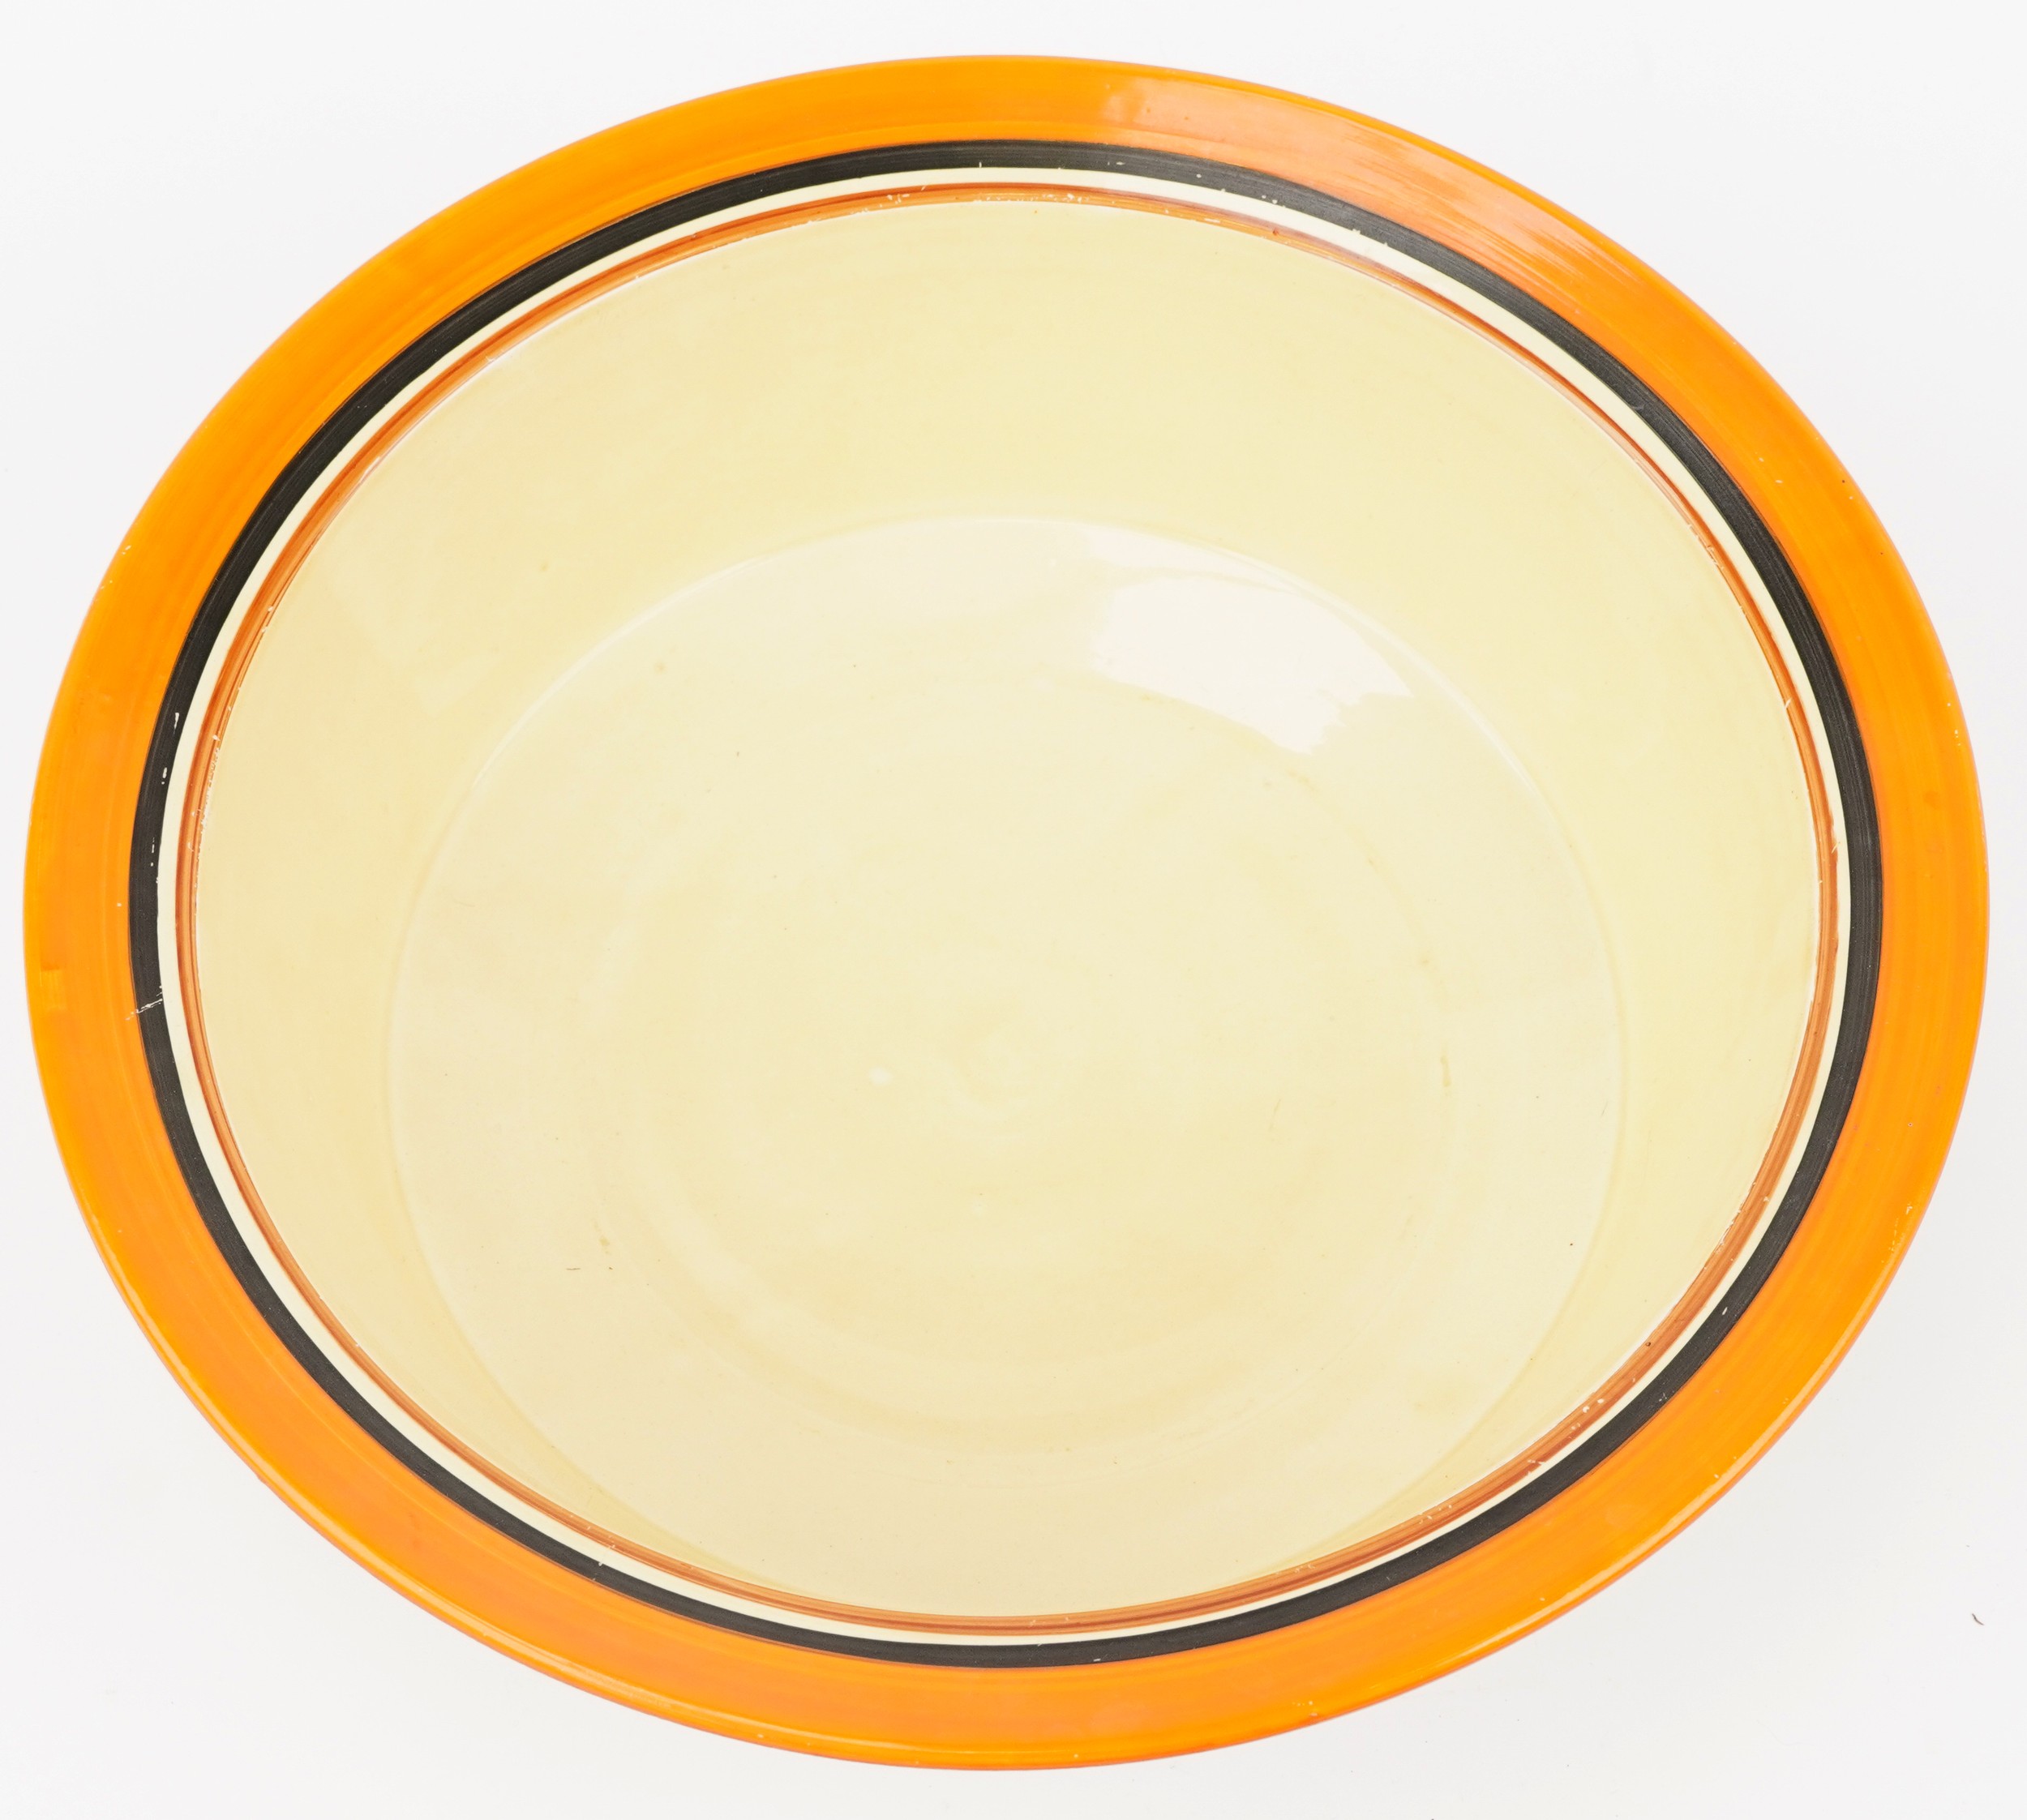 Clarice Cliff, large Art Deco Fantastique Bizarre Tolphin wash bowl hand painted in the melon - Image 5 of 7